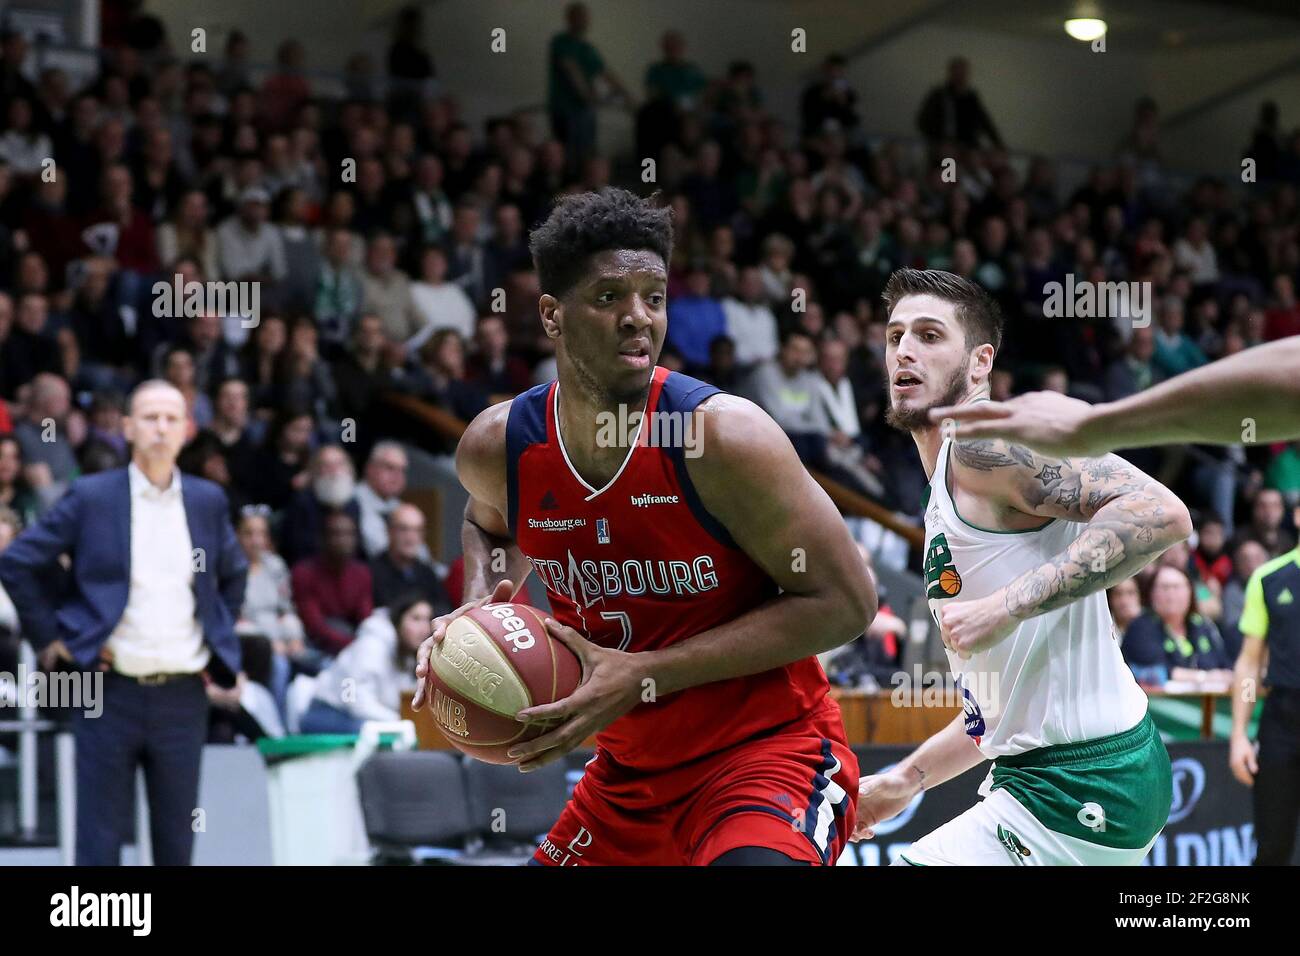 Damien INGLIS (7) of SIG Strasbourg during the French championship Jeep  Elite basketball match between Nanterre 92 and SIG Strasbourg on January  18, 2020 at Palais des Sports Maurice Thorez in Nanterre,